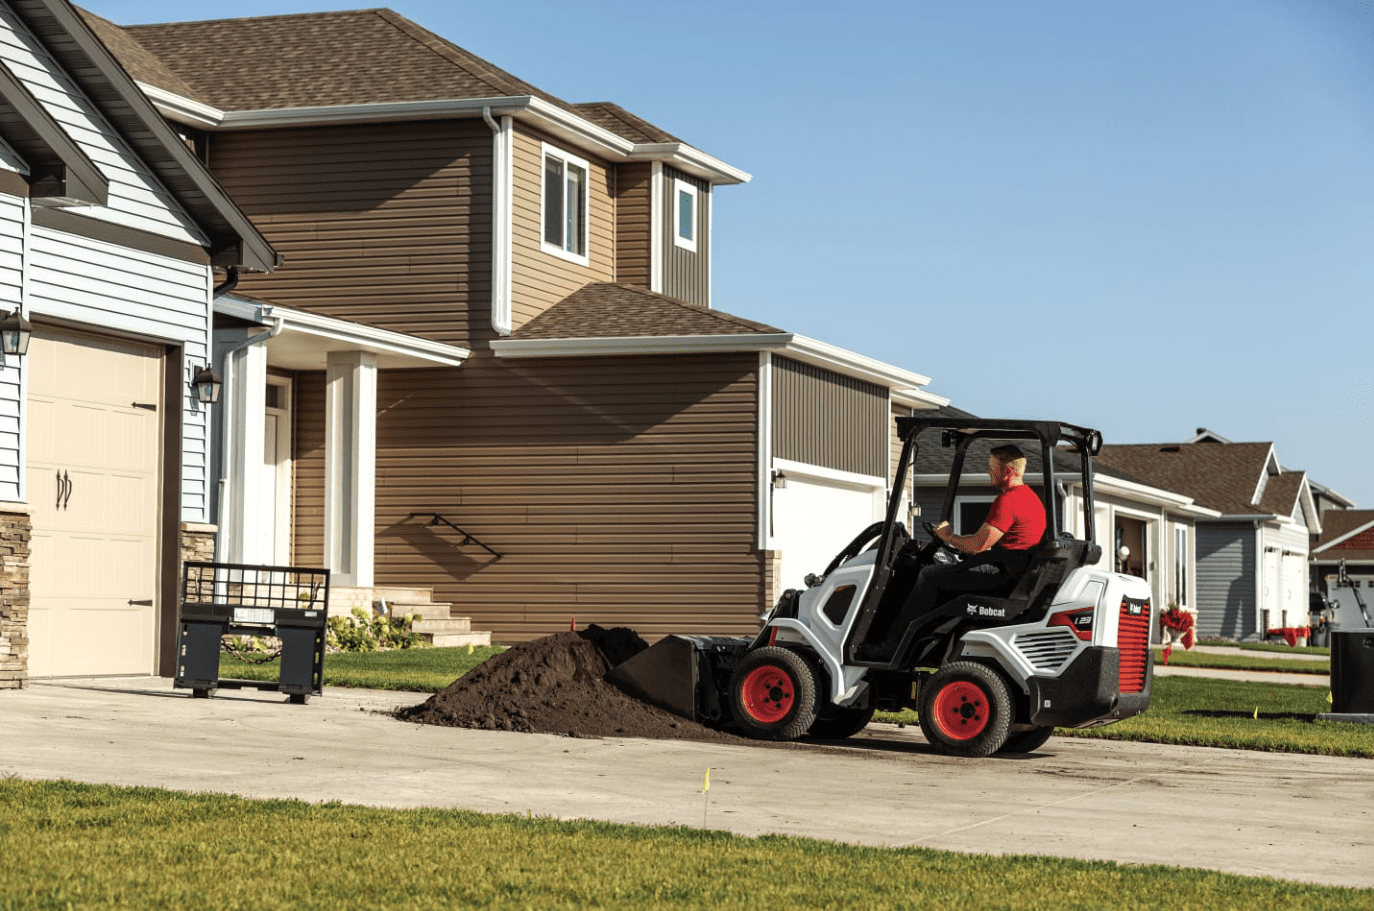 Browse Specs and more for the Bobcat L23 Small Articulated Loader - KC Bobcat